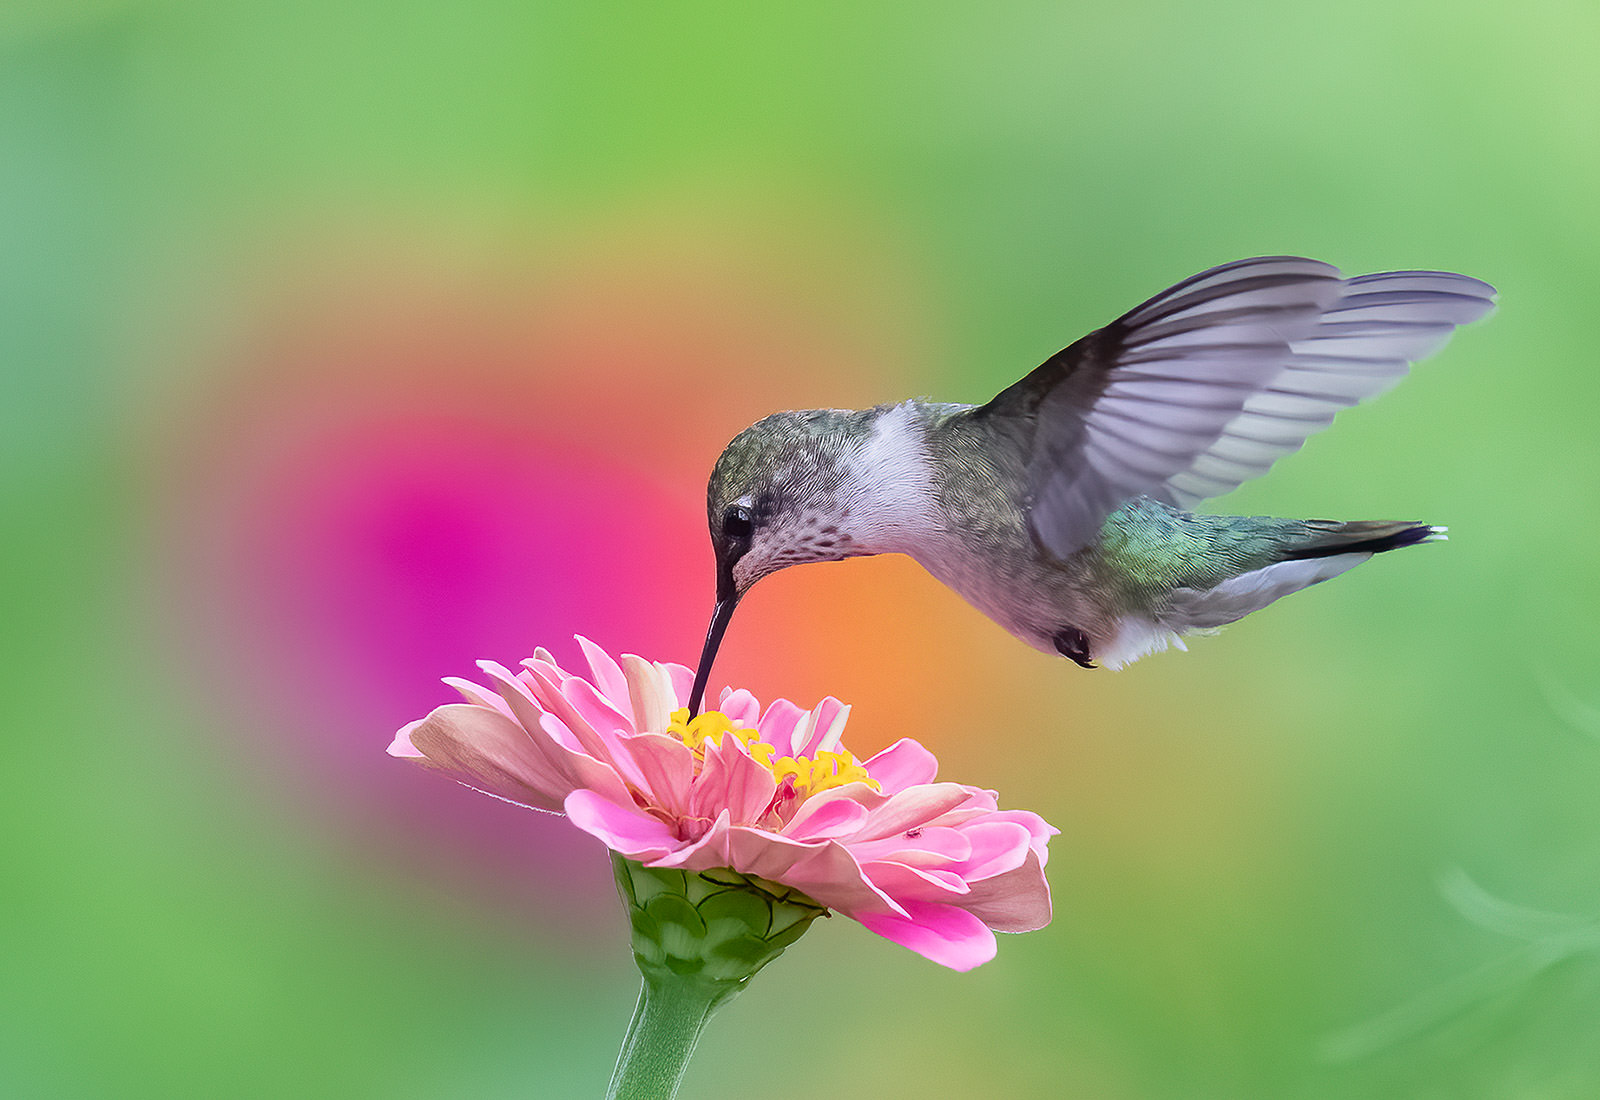 Ruby-throated Hummingbird hovering over flowers